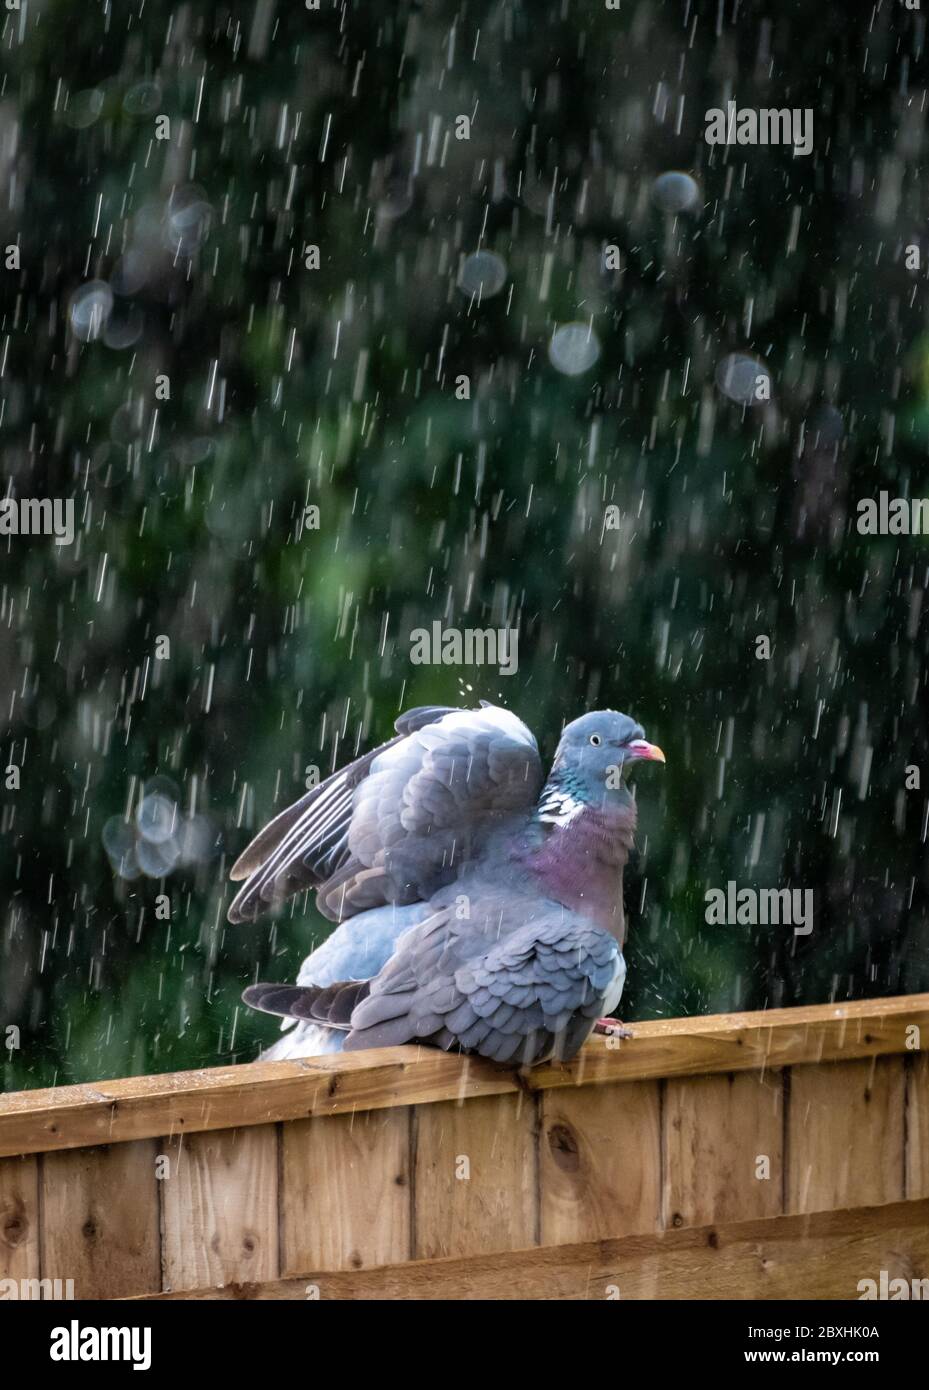 Poole, UK. Sunday 7 June 2020. A pigeon makes the most of the heavy rain and washes its feathers. Credit: Thomas Faull/Alamy Live News Stock Photo